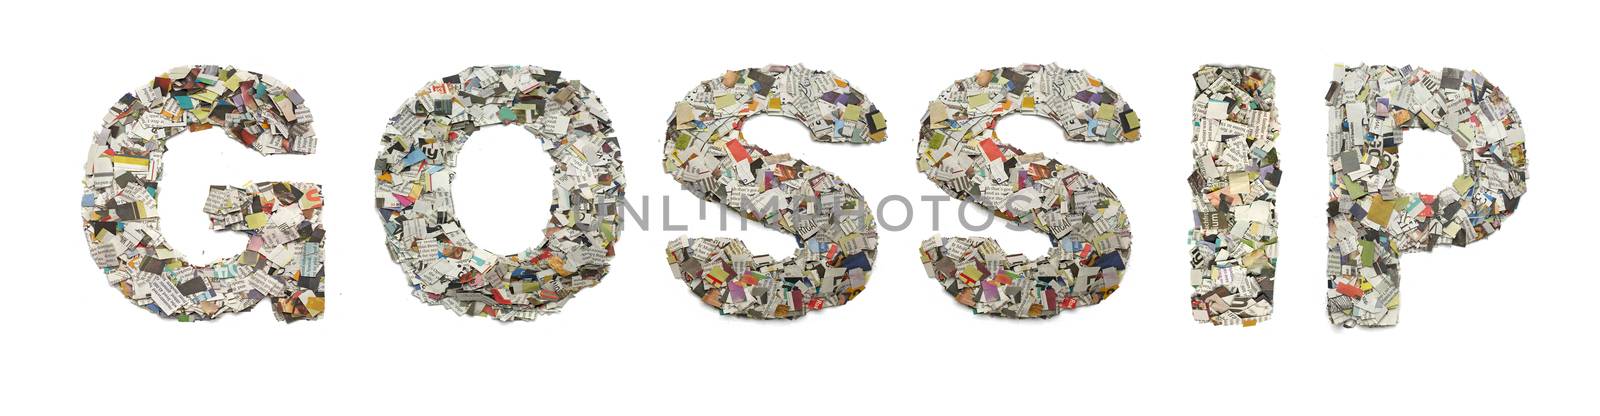 the word  GOSSIP made from newspaper confetti isolated on white by davincidig